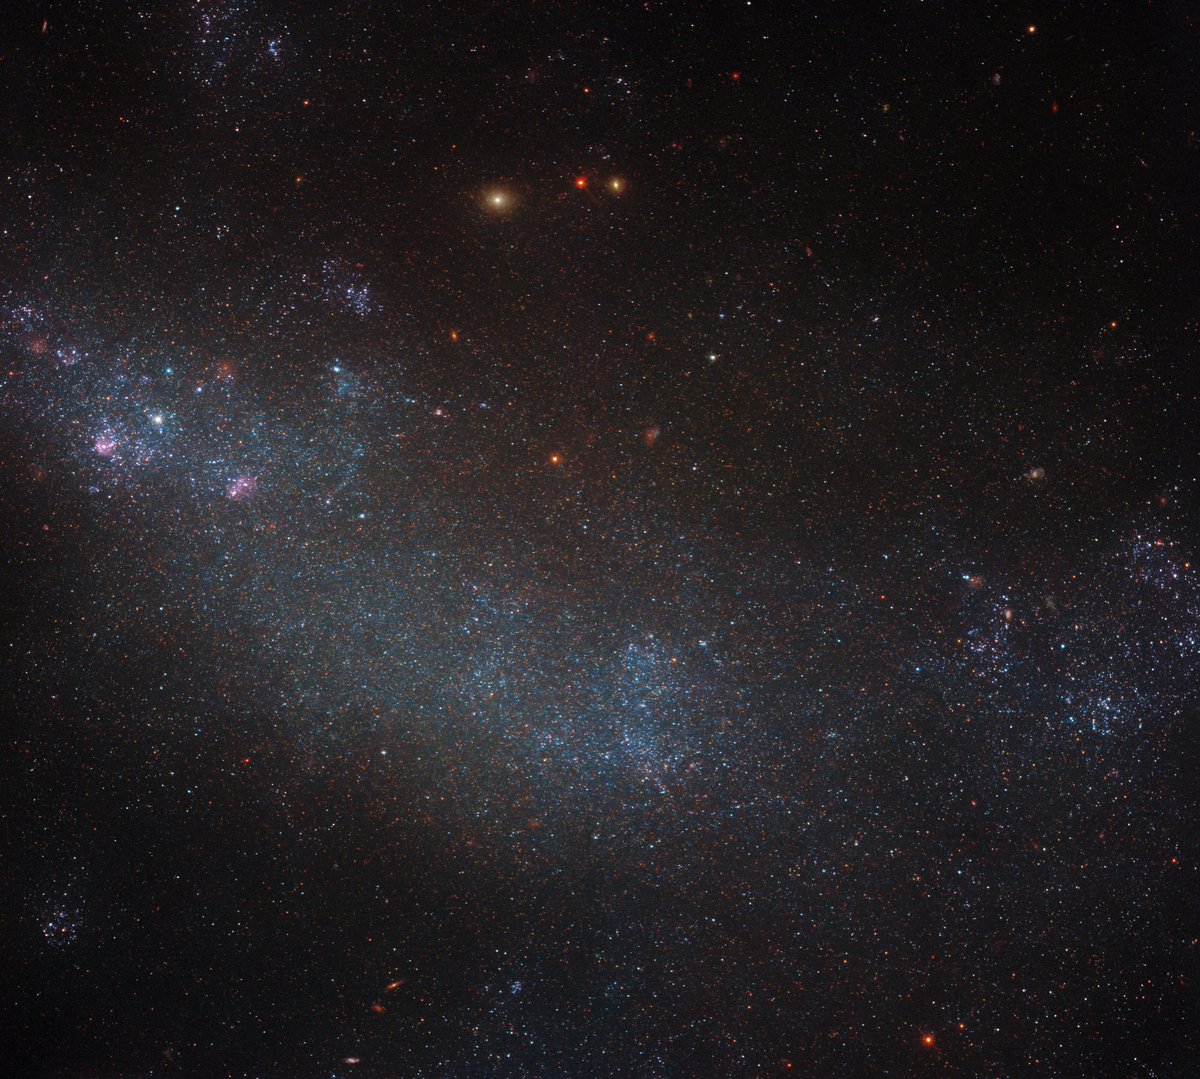 📷 This NASA/ESA @HUBBLE_space image shows a densely packed field of stars, on a background of dust, gas and light from more distant objects. The stars take up so much of the view that it's hard to realise that you're actually looking at a galaxy (called ESO 245-5)!